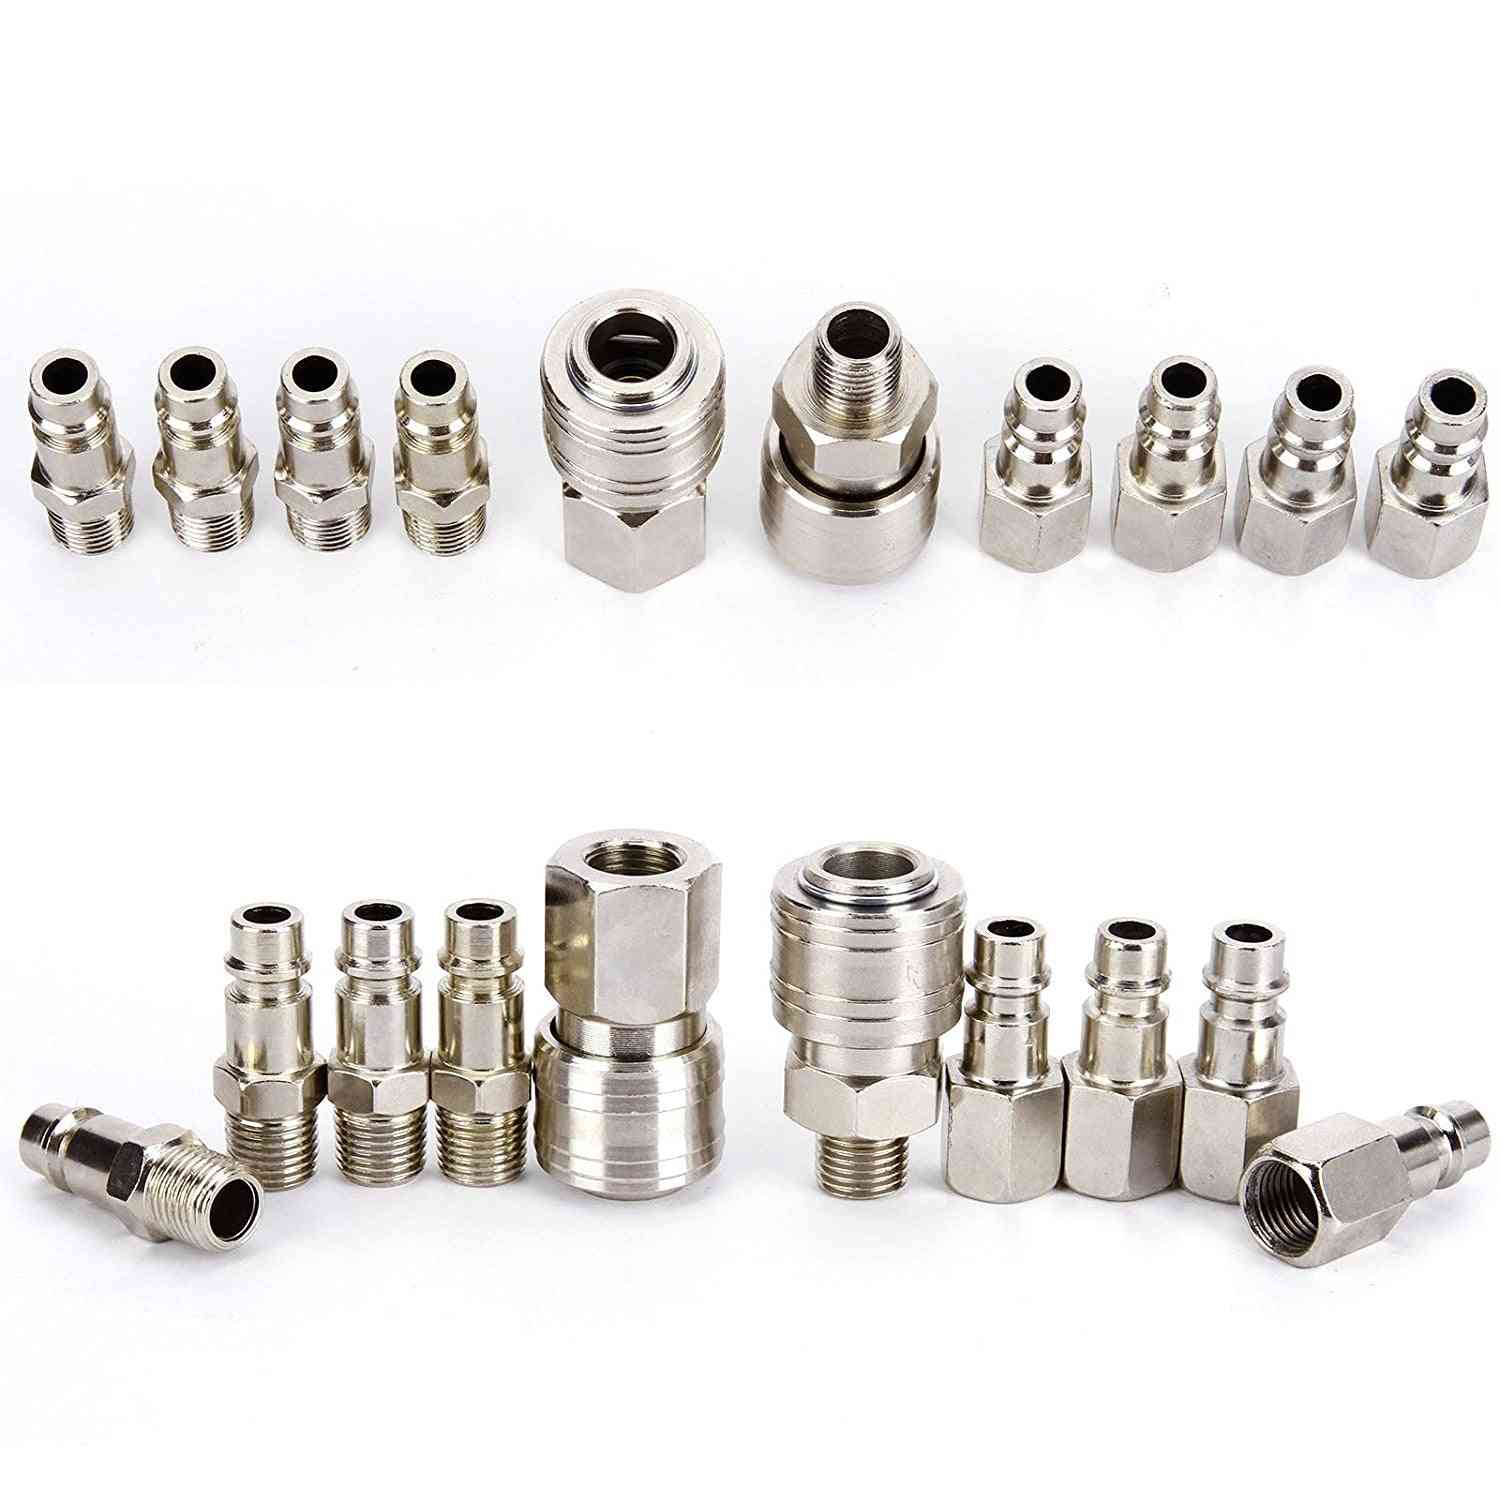 10pcs Of Fittings Quick Release Coupling Set Ft11